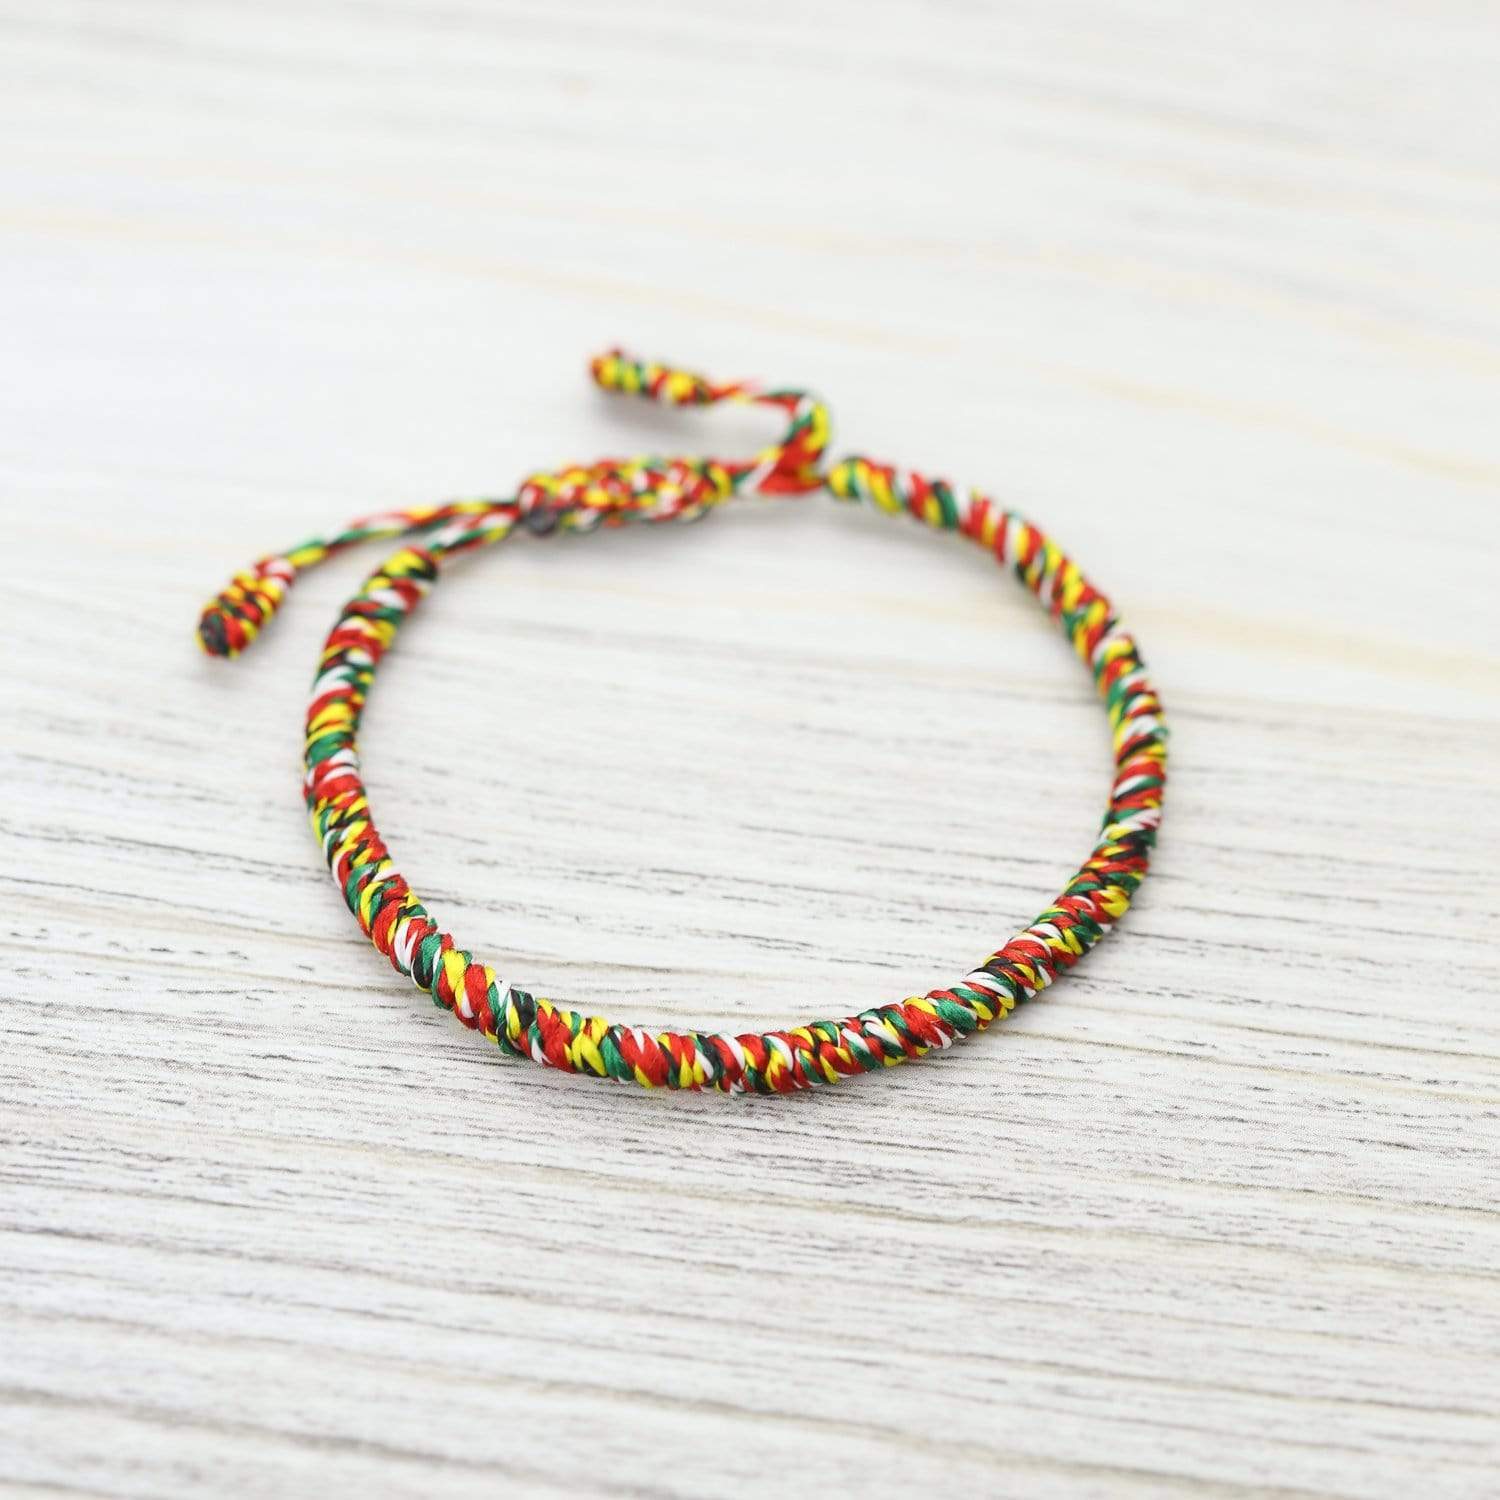 Colorful Handmade Bracelets Made Of Beads And Thread Stock Photo